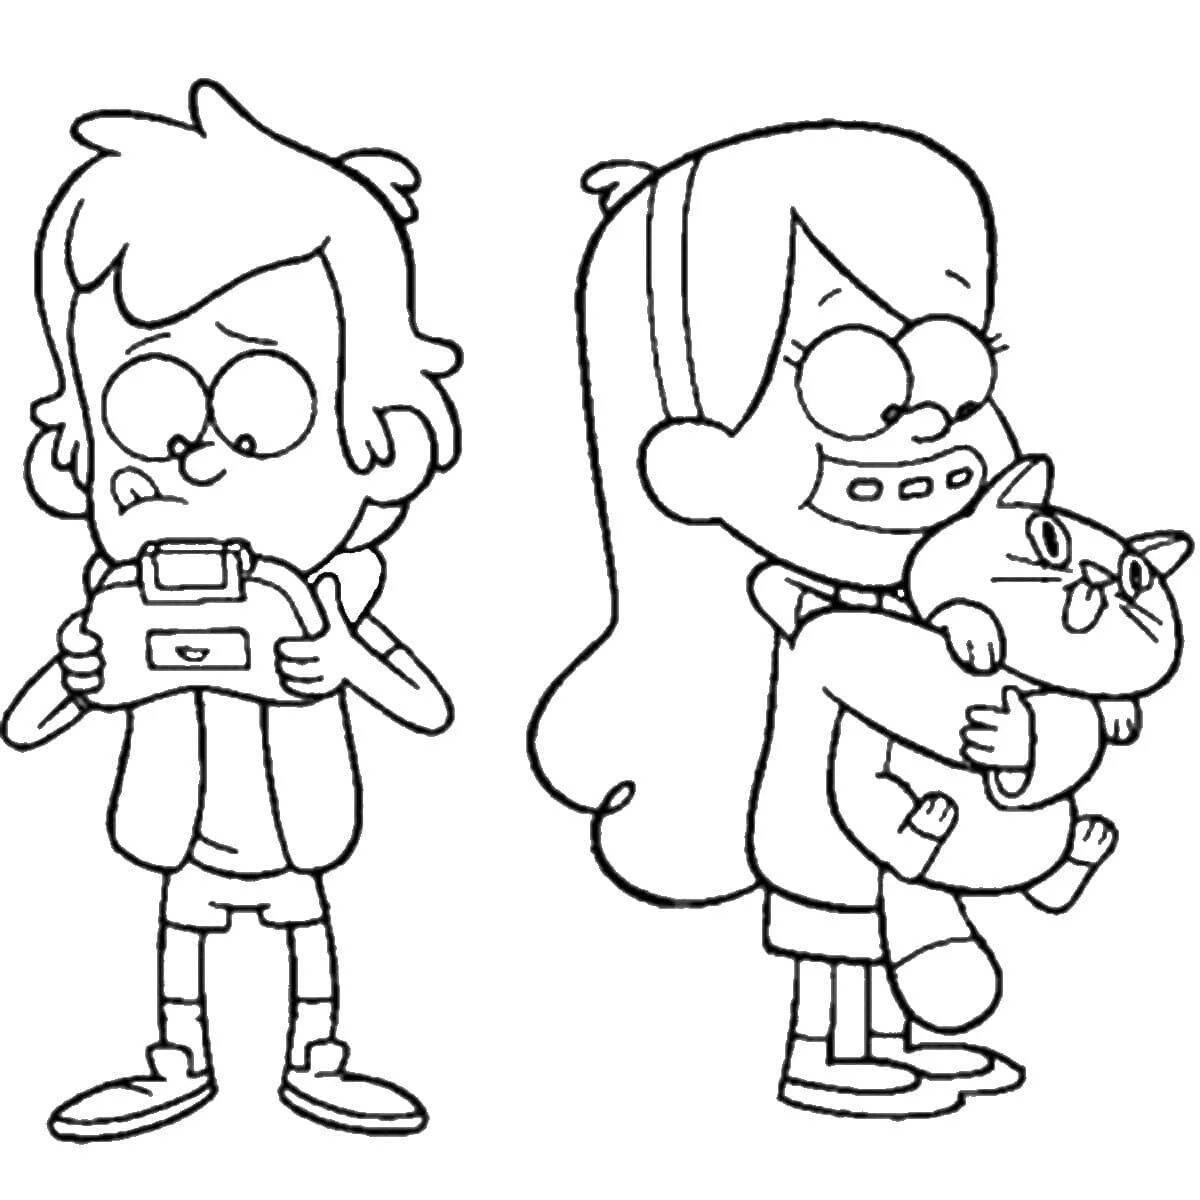 Joyful mabel from gravity falls coloring page